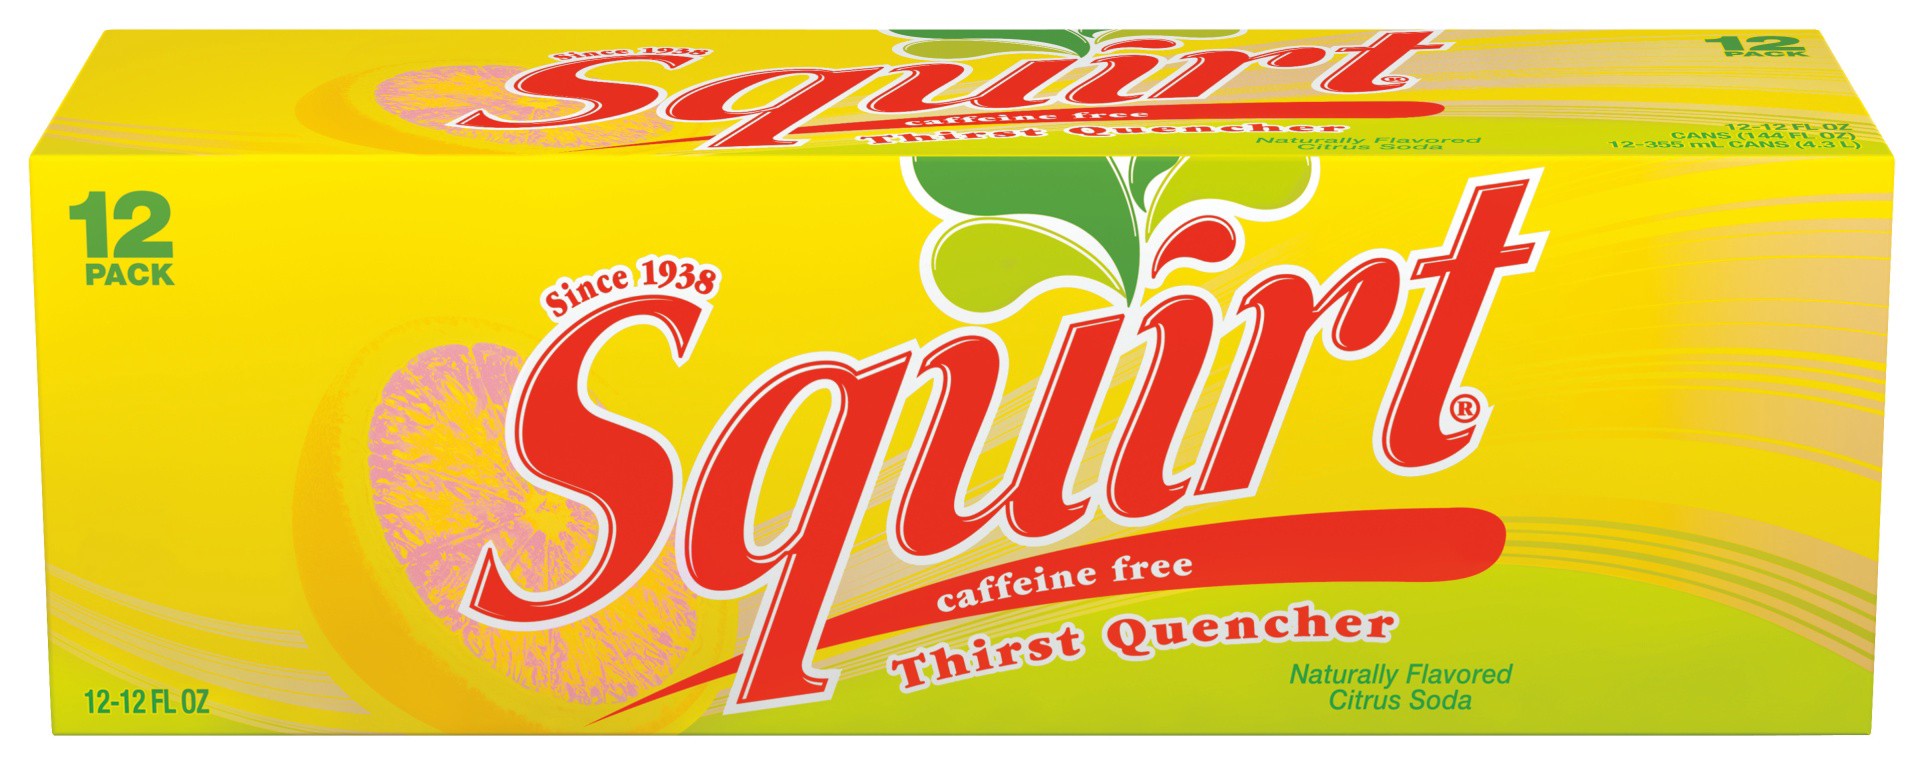 slide 1 of 3, Squirt Citrus Soda, 12 fl oz cans, 12 pack, 12 ct